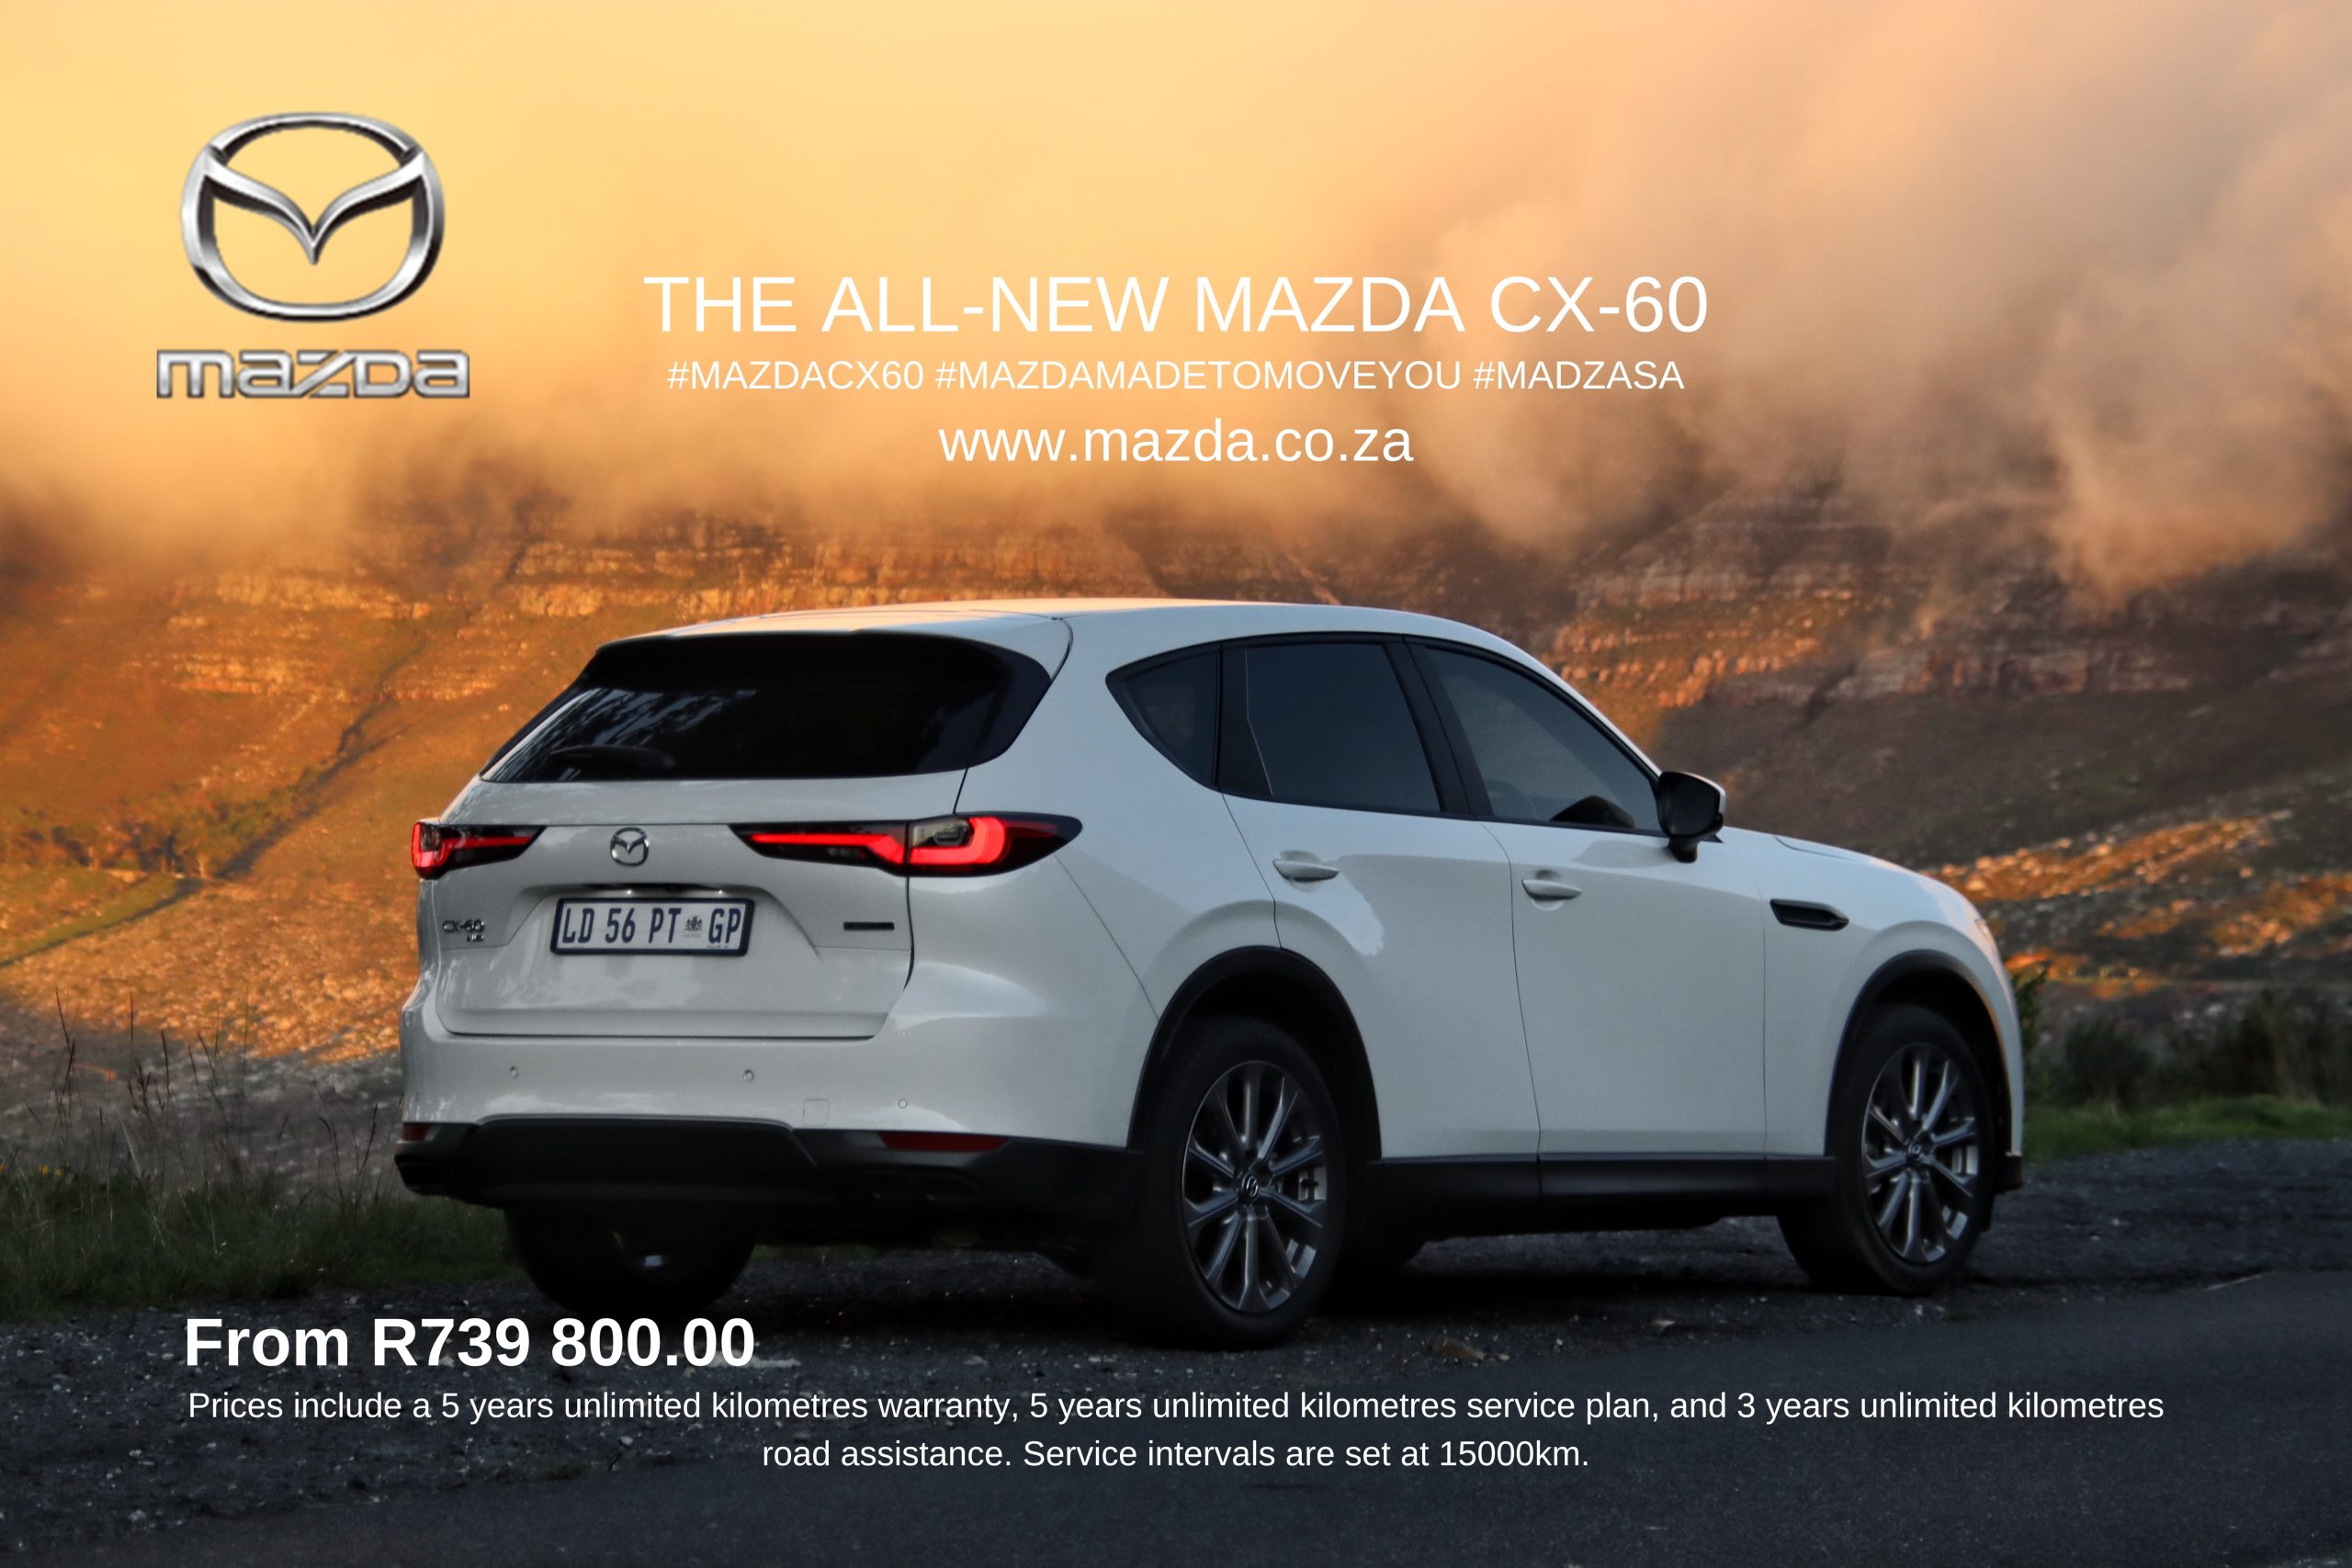 https://westerncapeexperiences.com/wp-content/uploads/2023/06/Mazda-CX-60-scaled.jpg